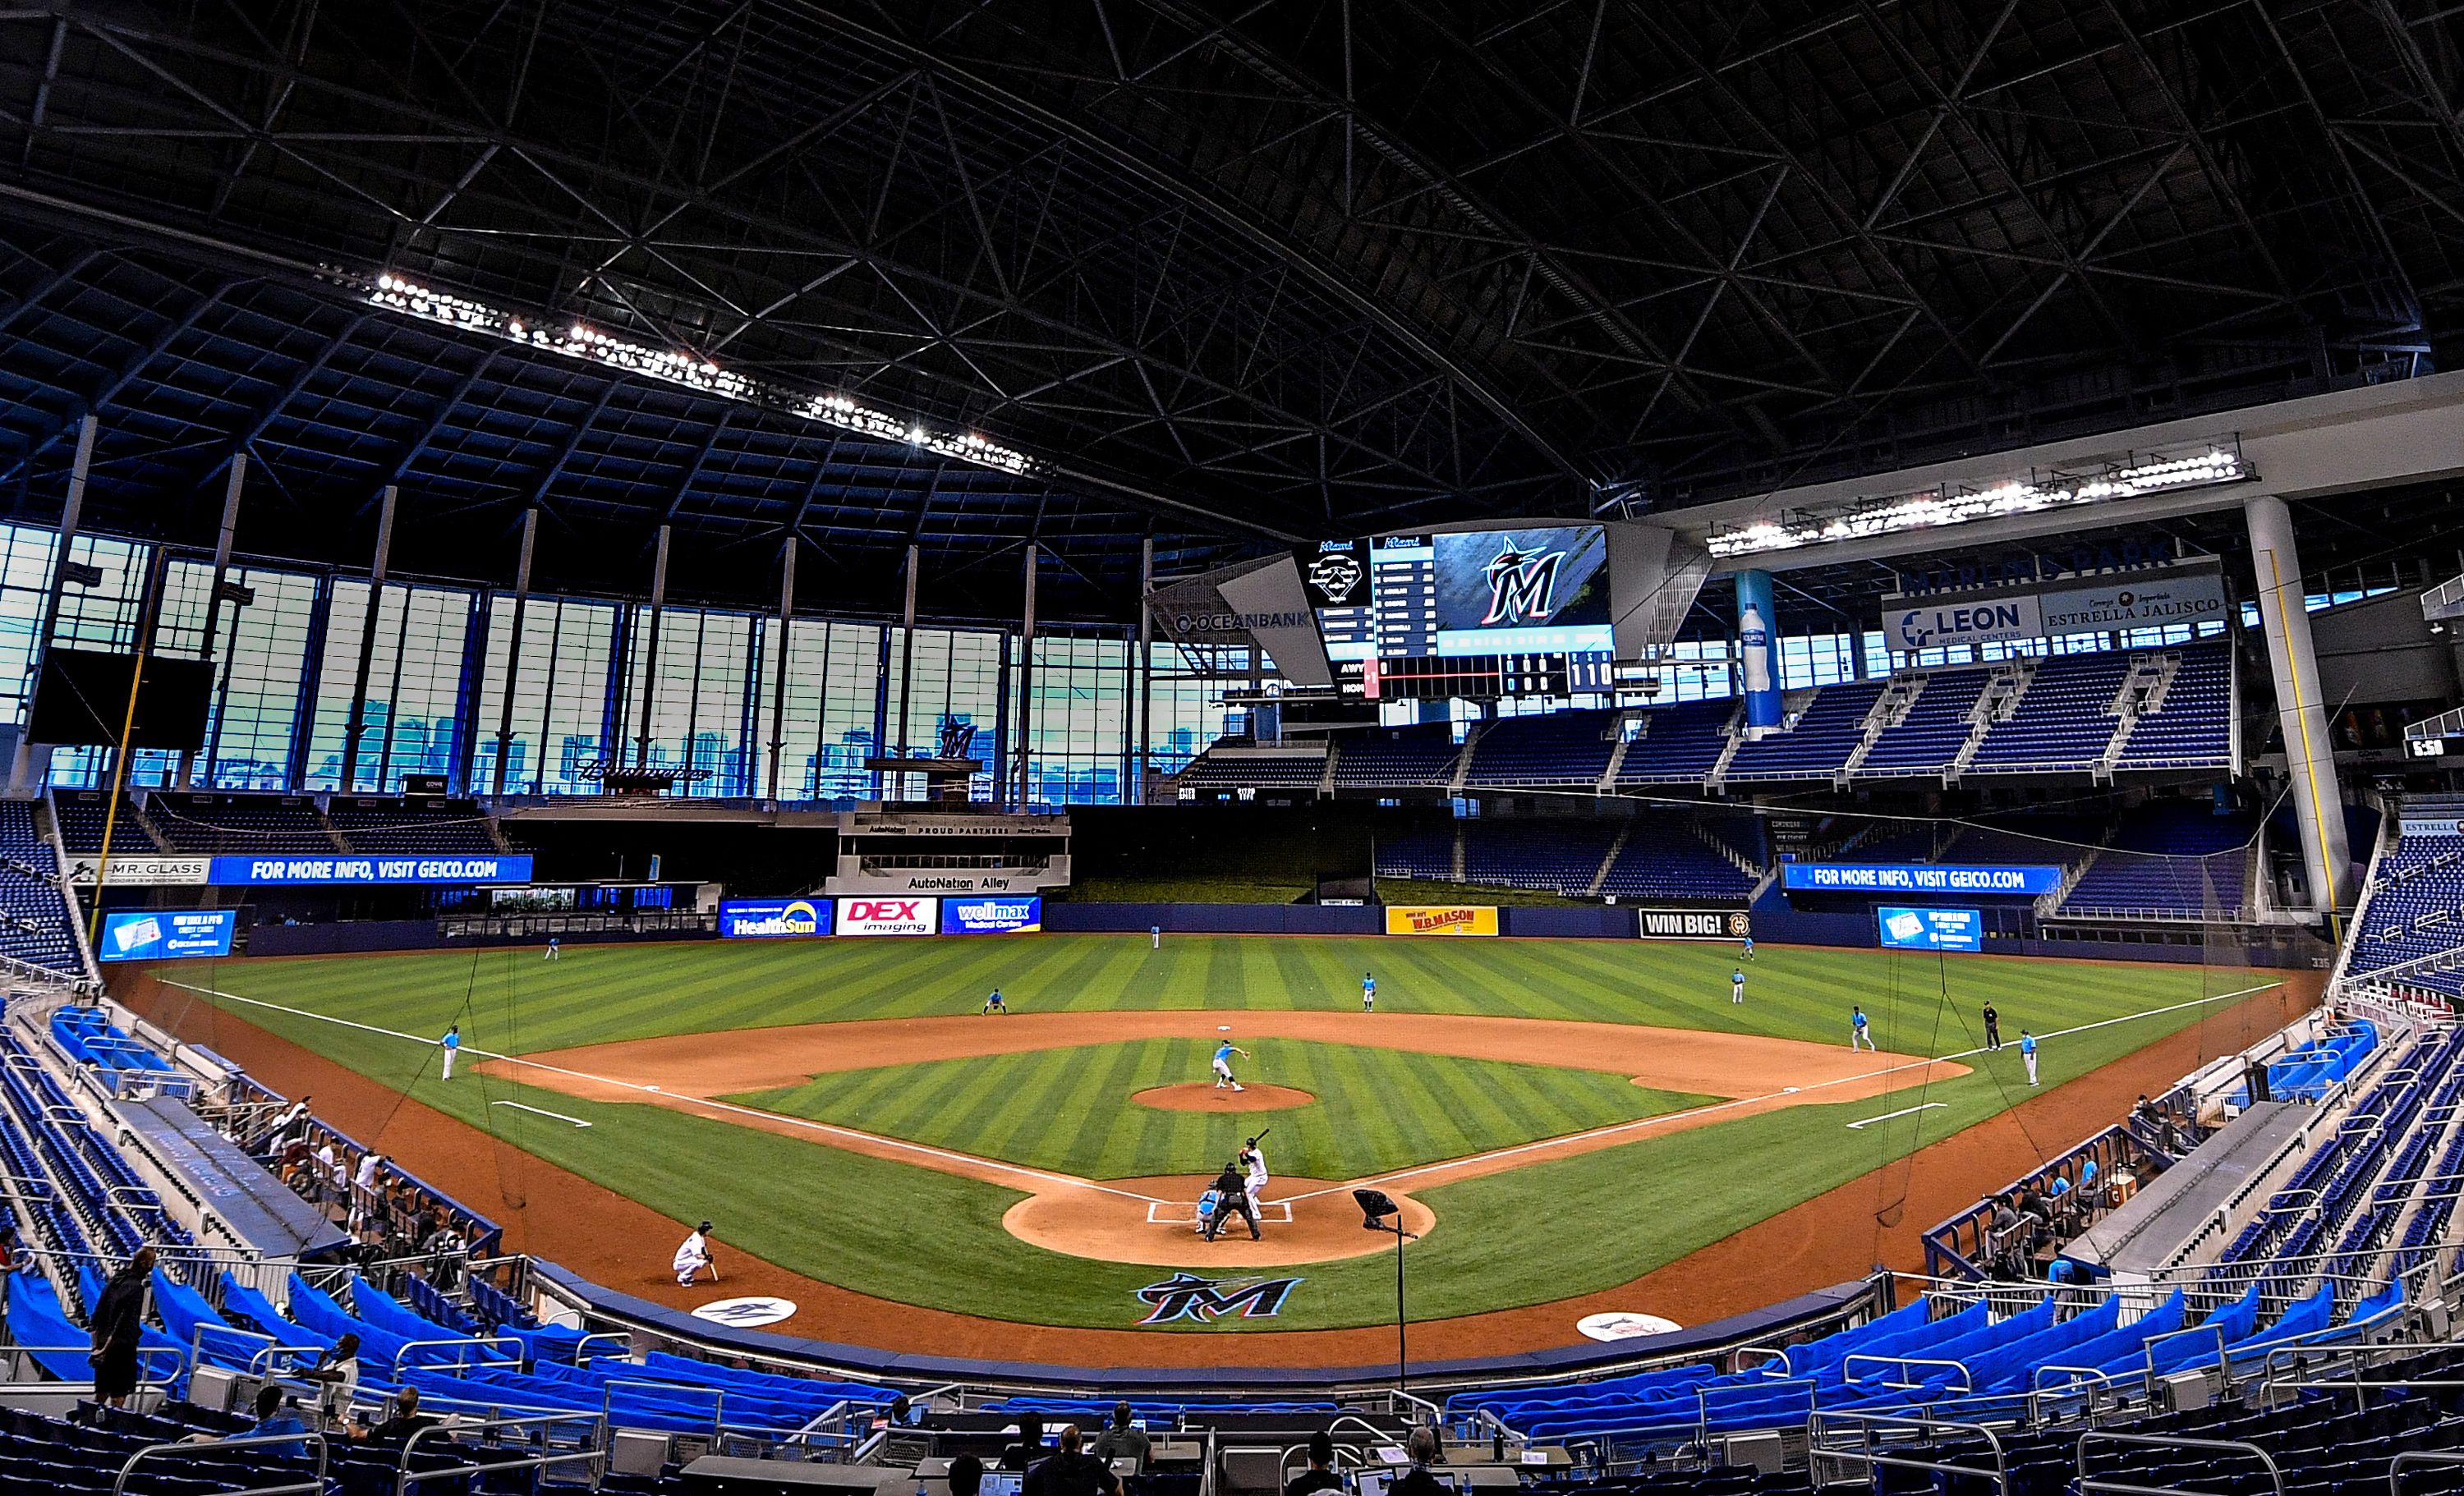 Let's you and I talk about this Miami Marlins / MLB COVID-19